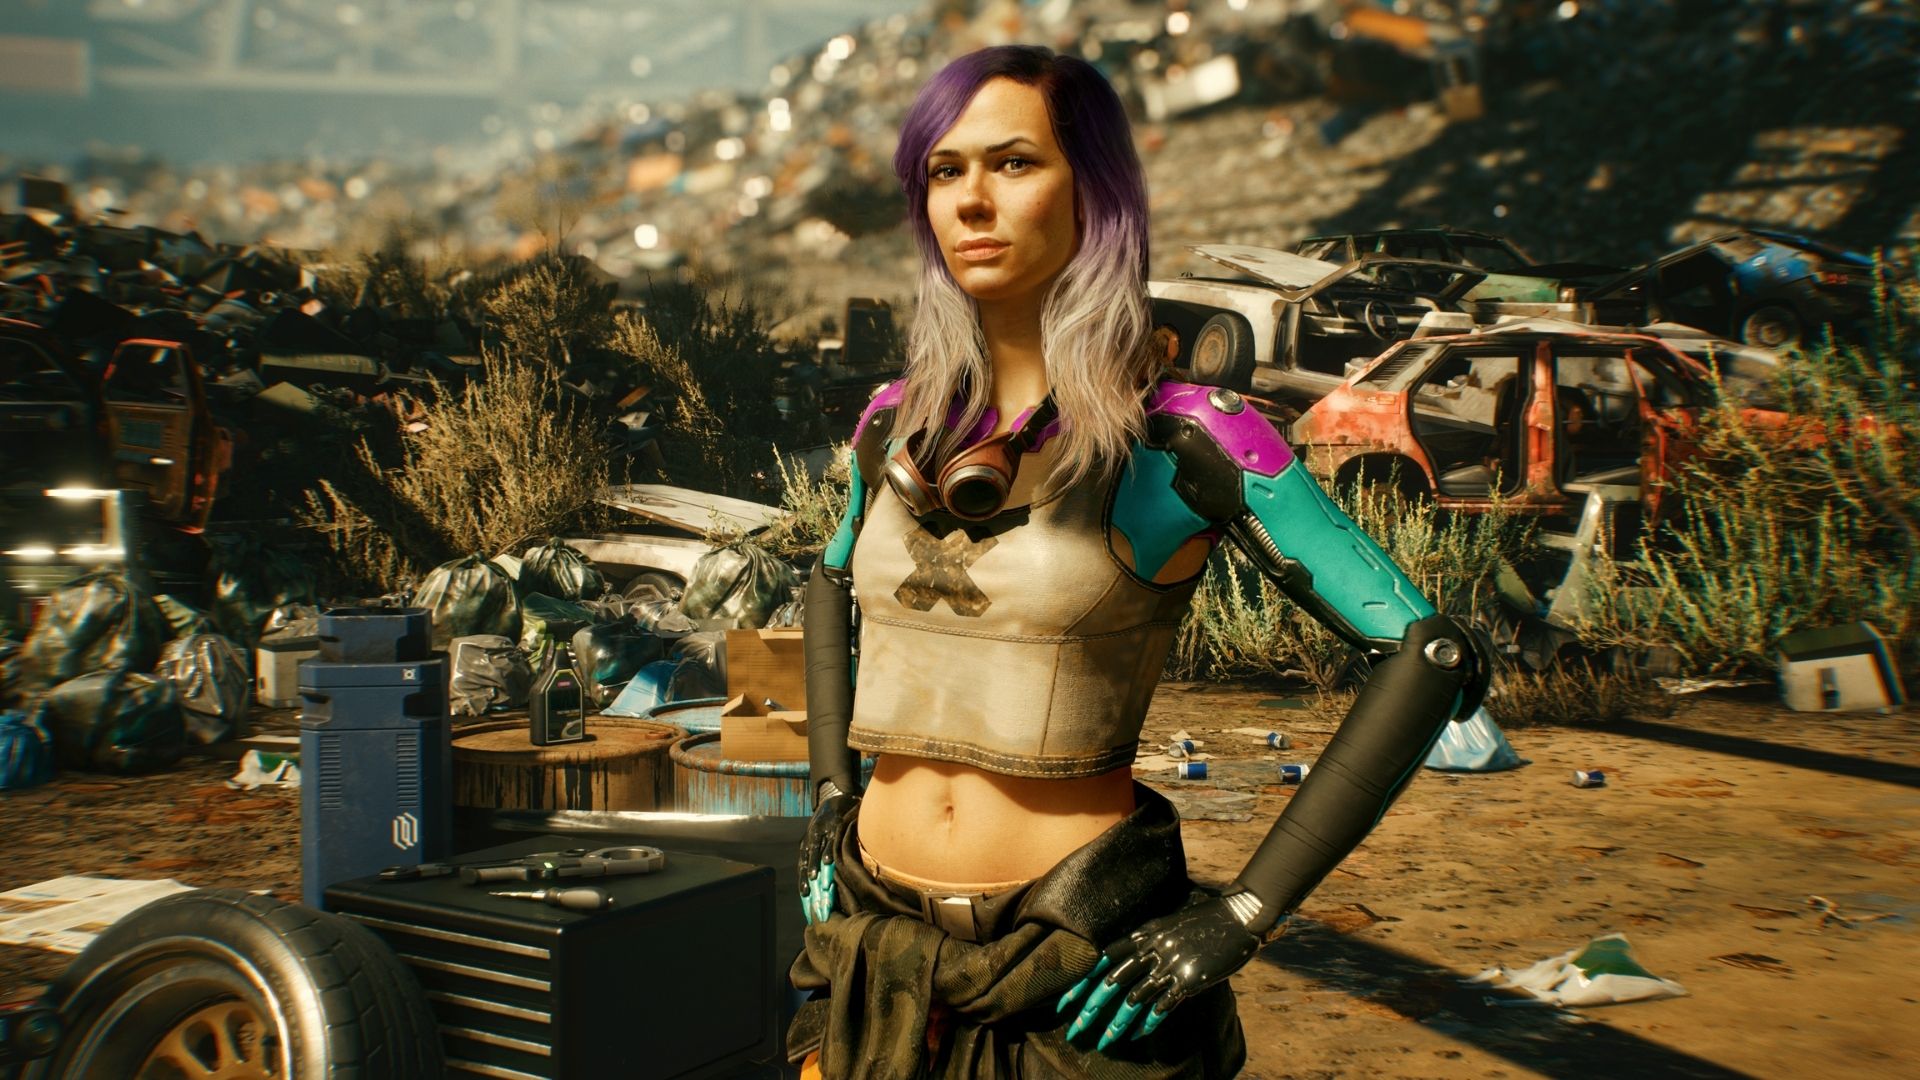 Cyberpunk 2077 has some truly ridiculous gaming cameos